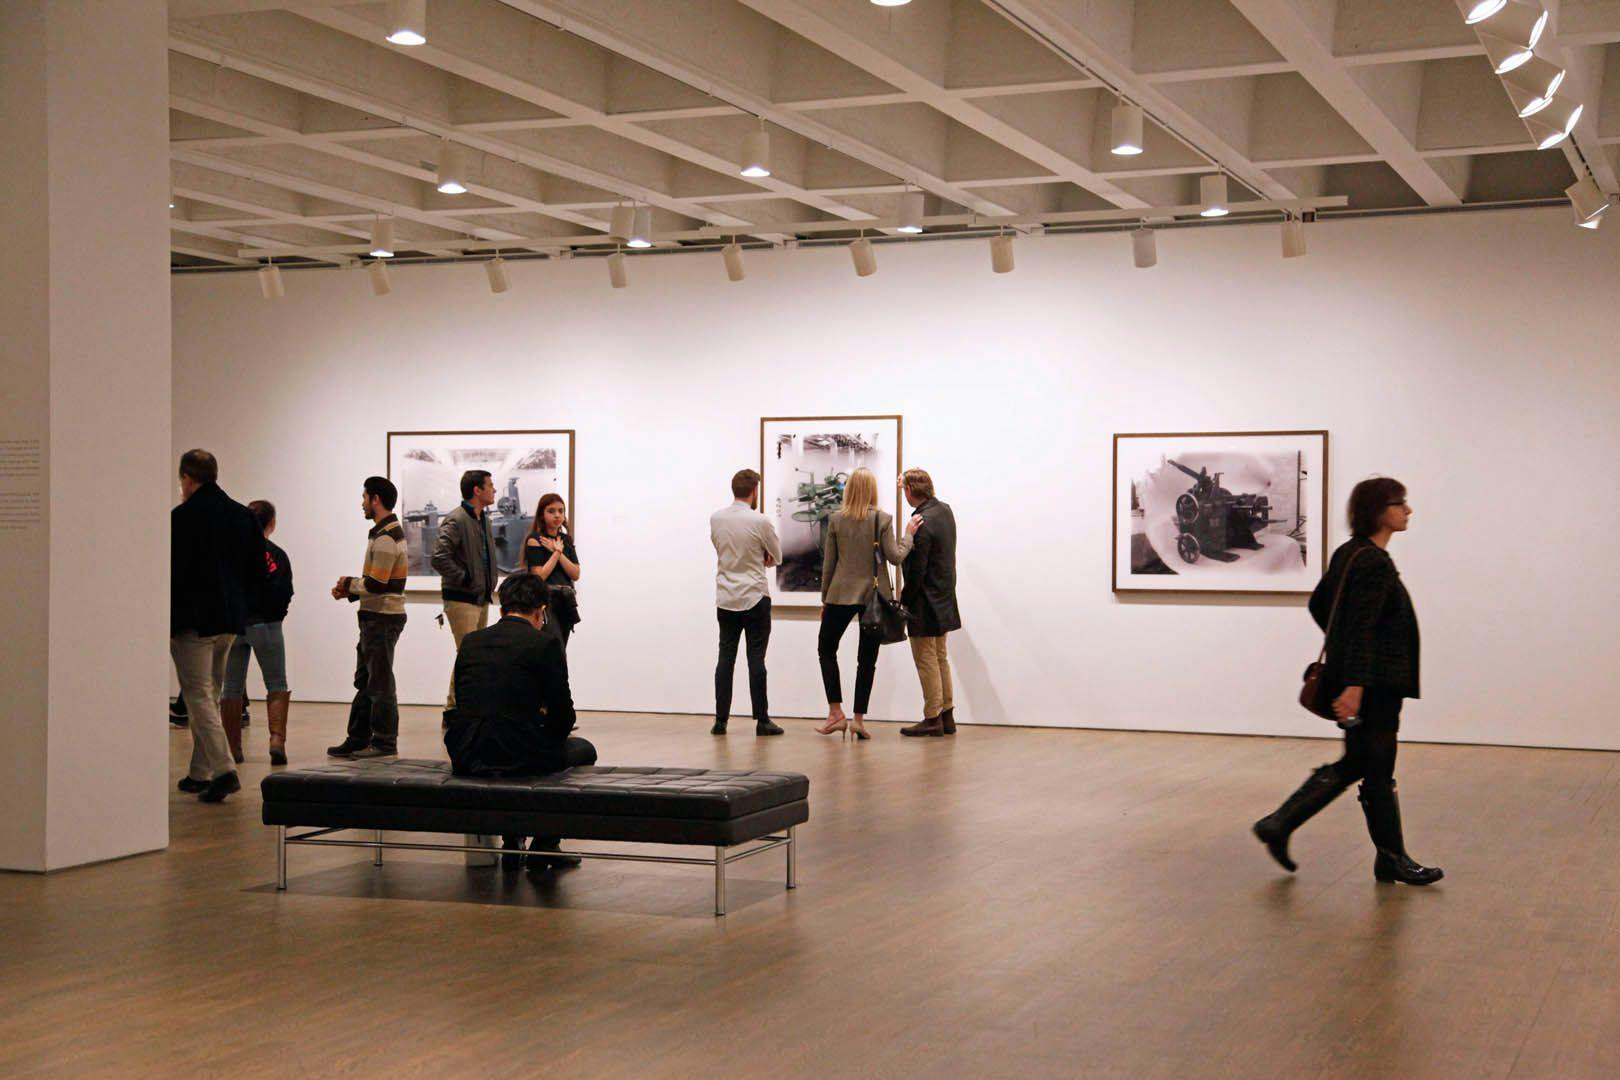 Installation view of the opening reception of the exhibition Thomas Ruff at AGO Toronto, dated 2016.